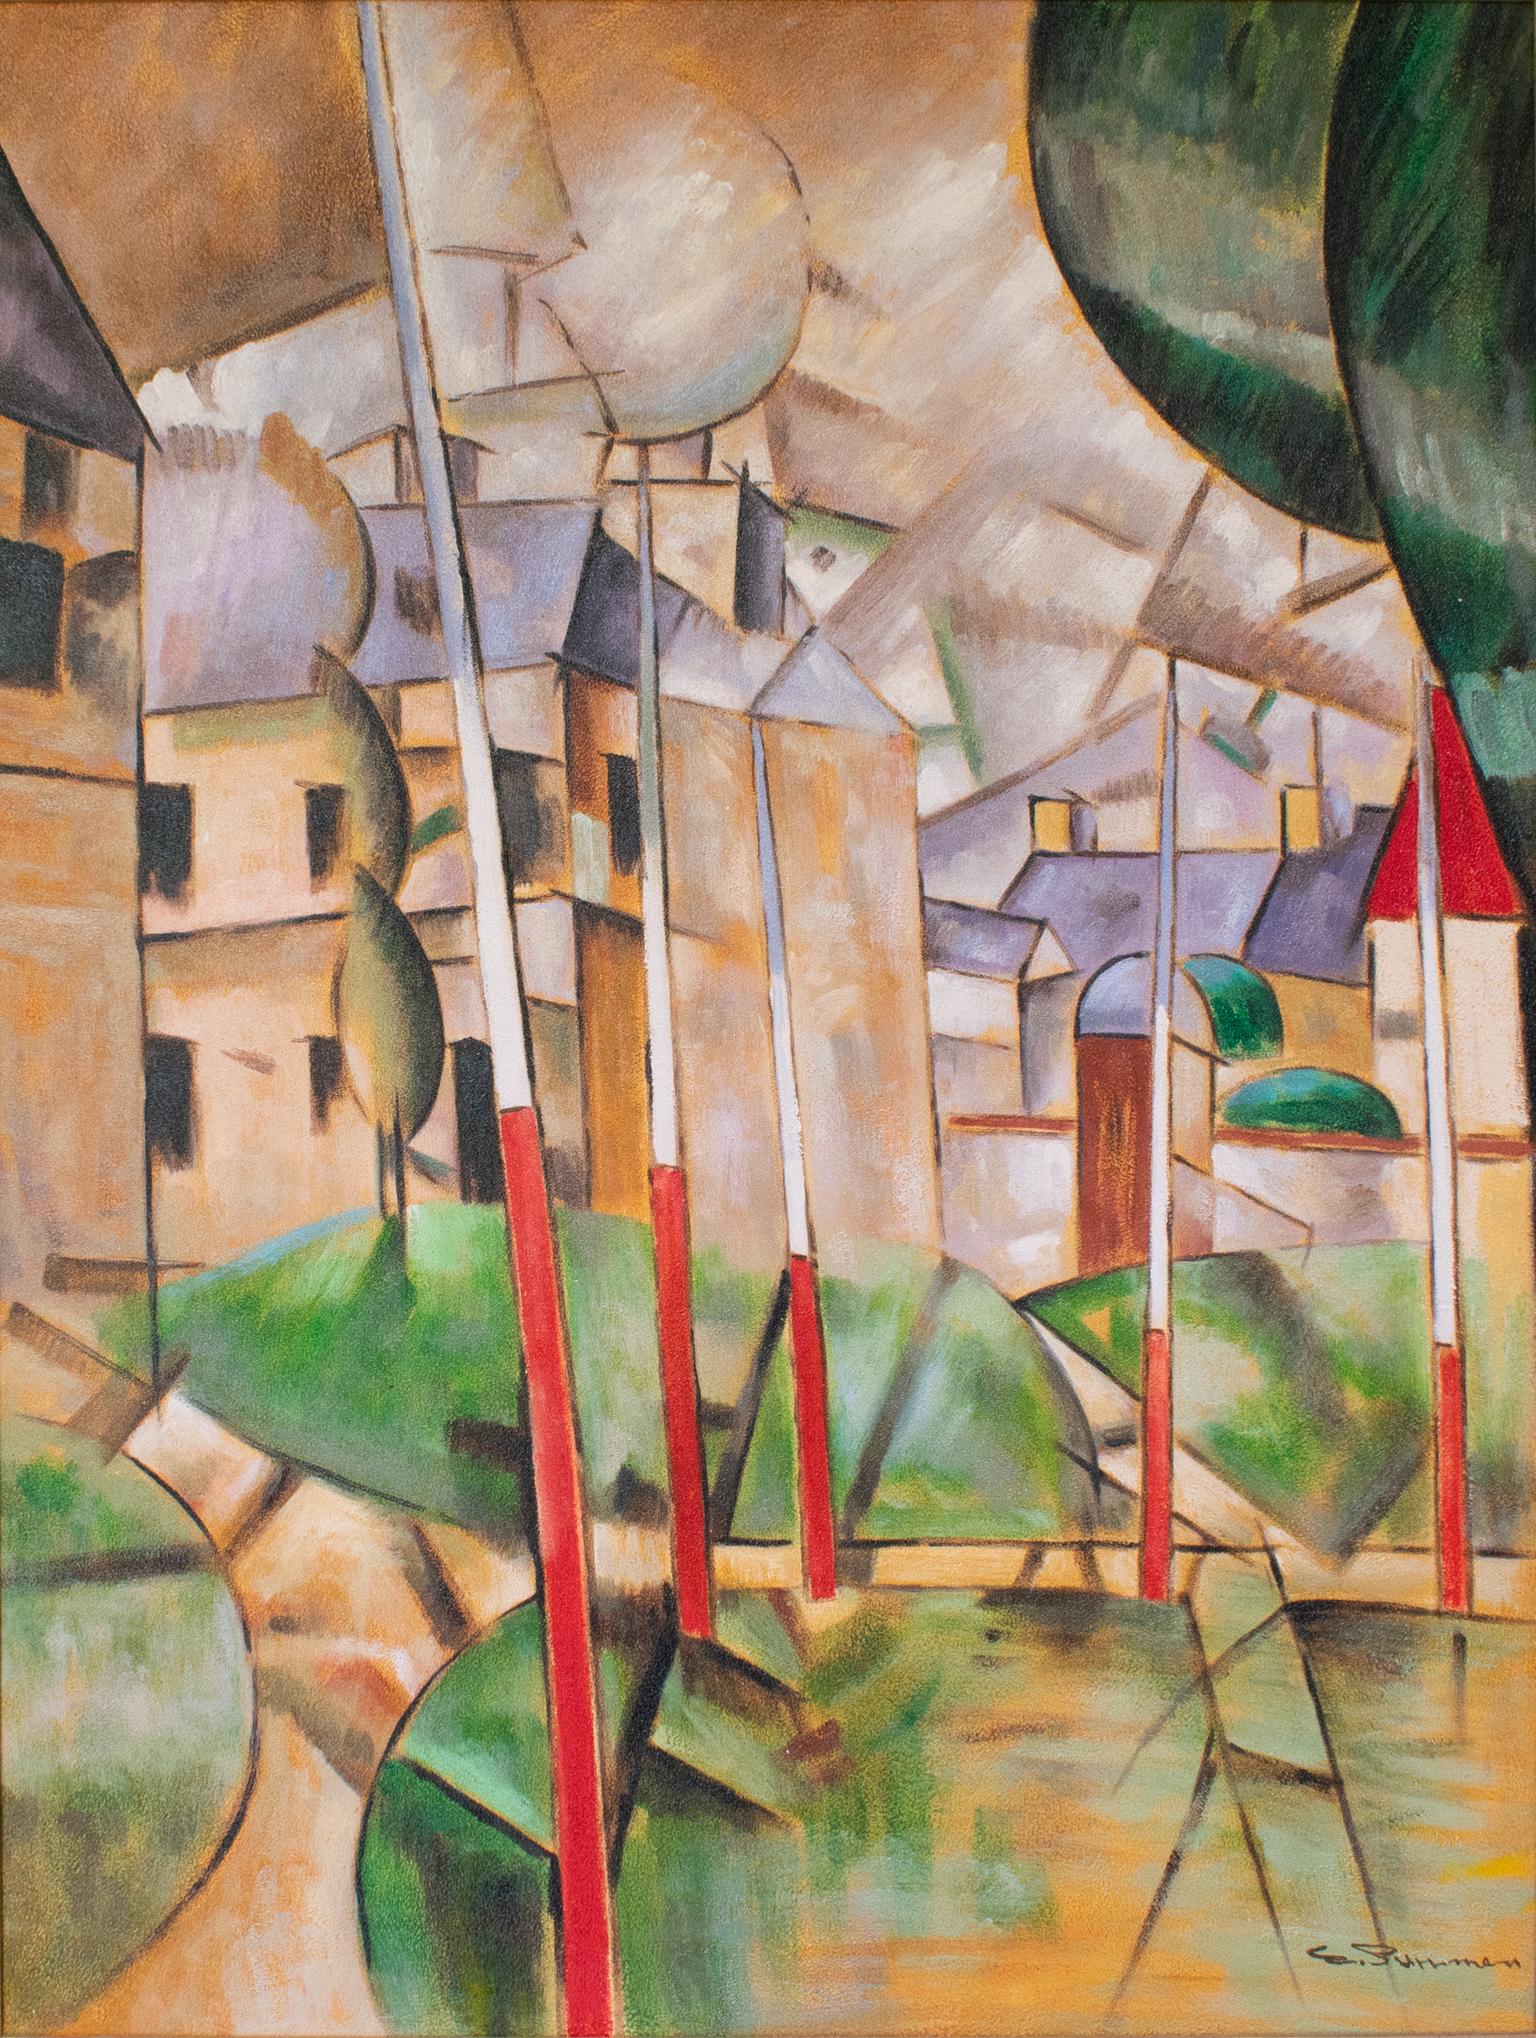 Abstract Cityscape Cubist Oil on Canvas Painting by E. Pullman For Sale 2